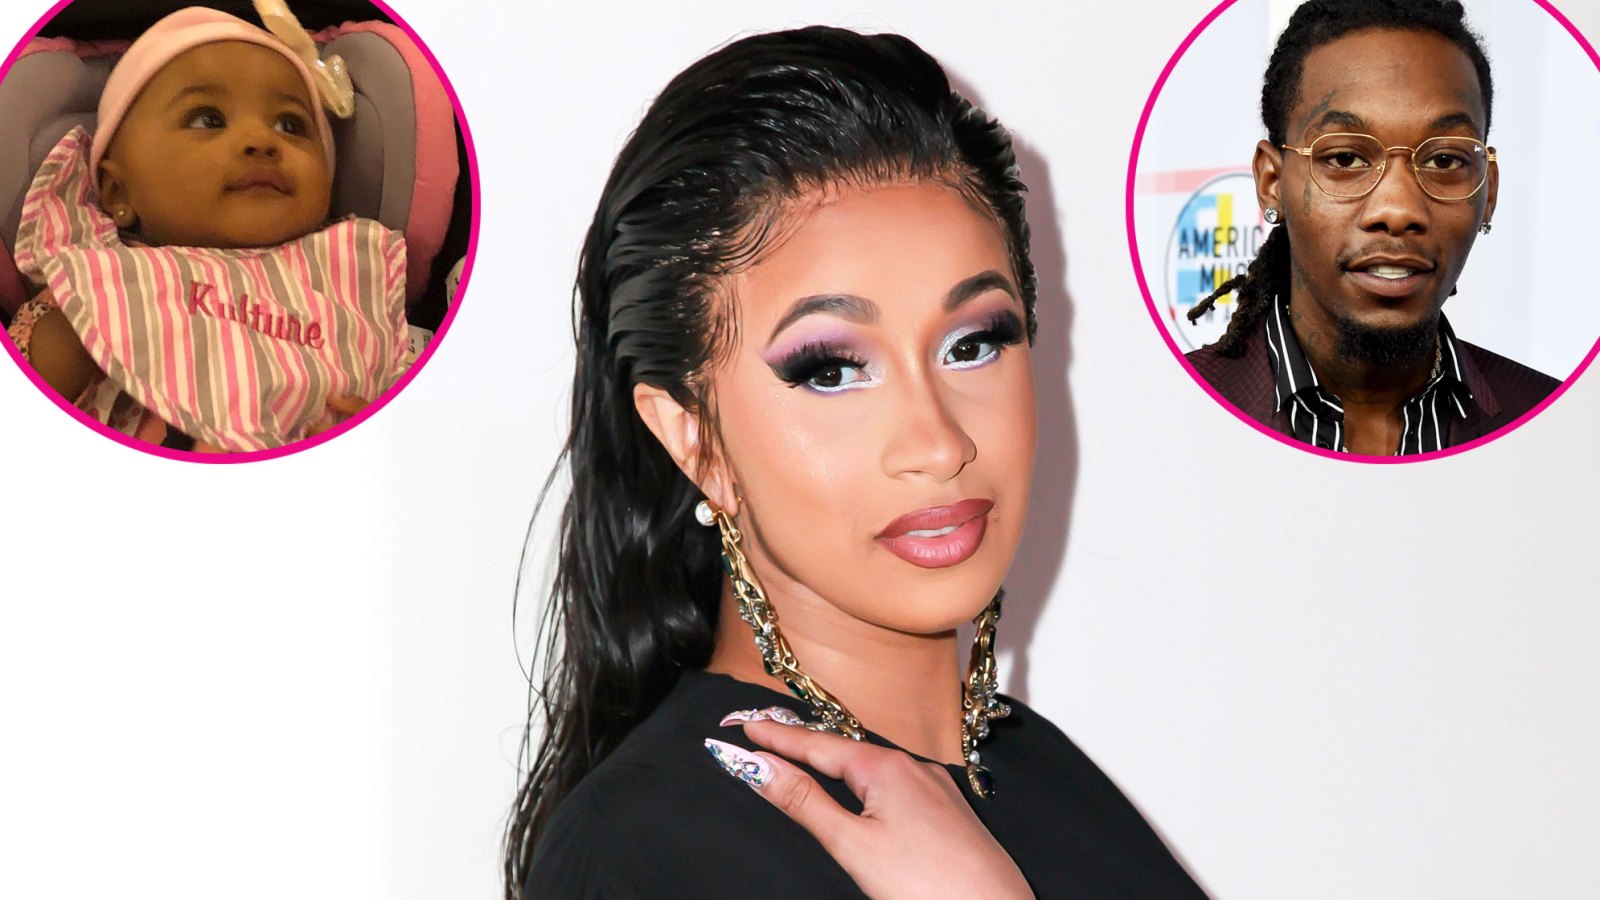 Cardi B Wants to ‘Go Home’ to Estranged Husband Offset and Daughter Kulture